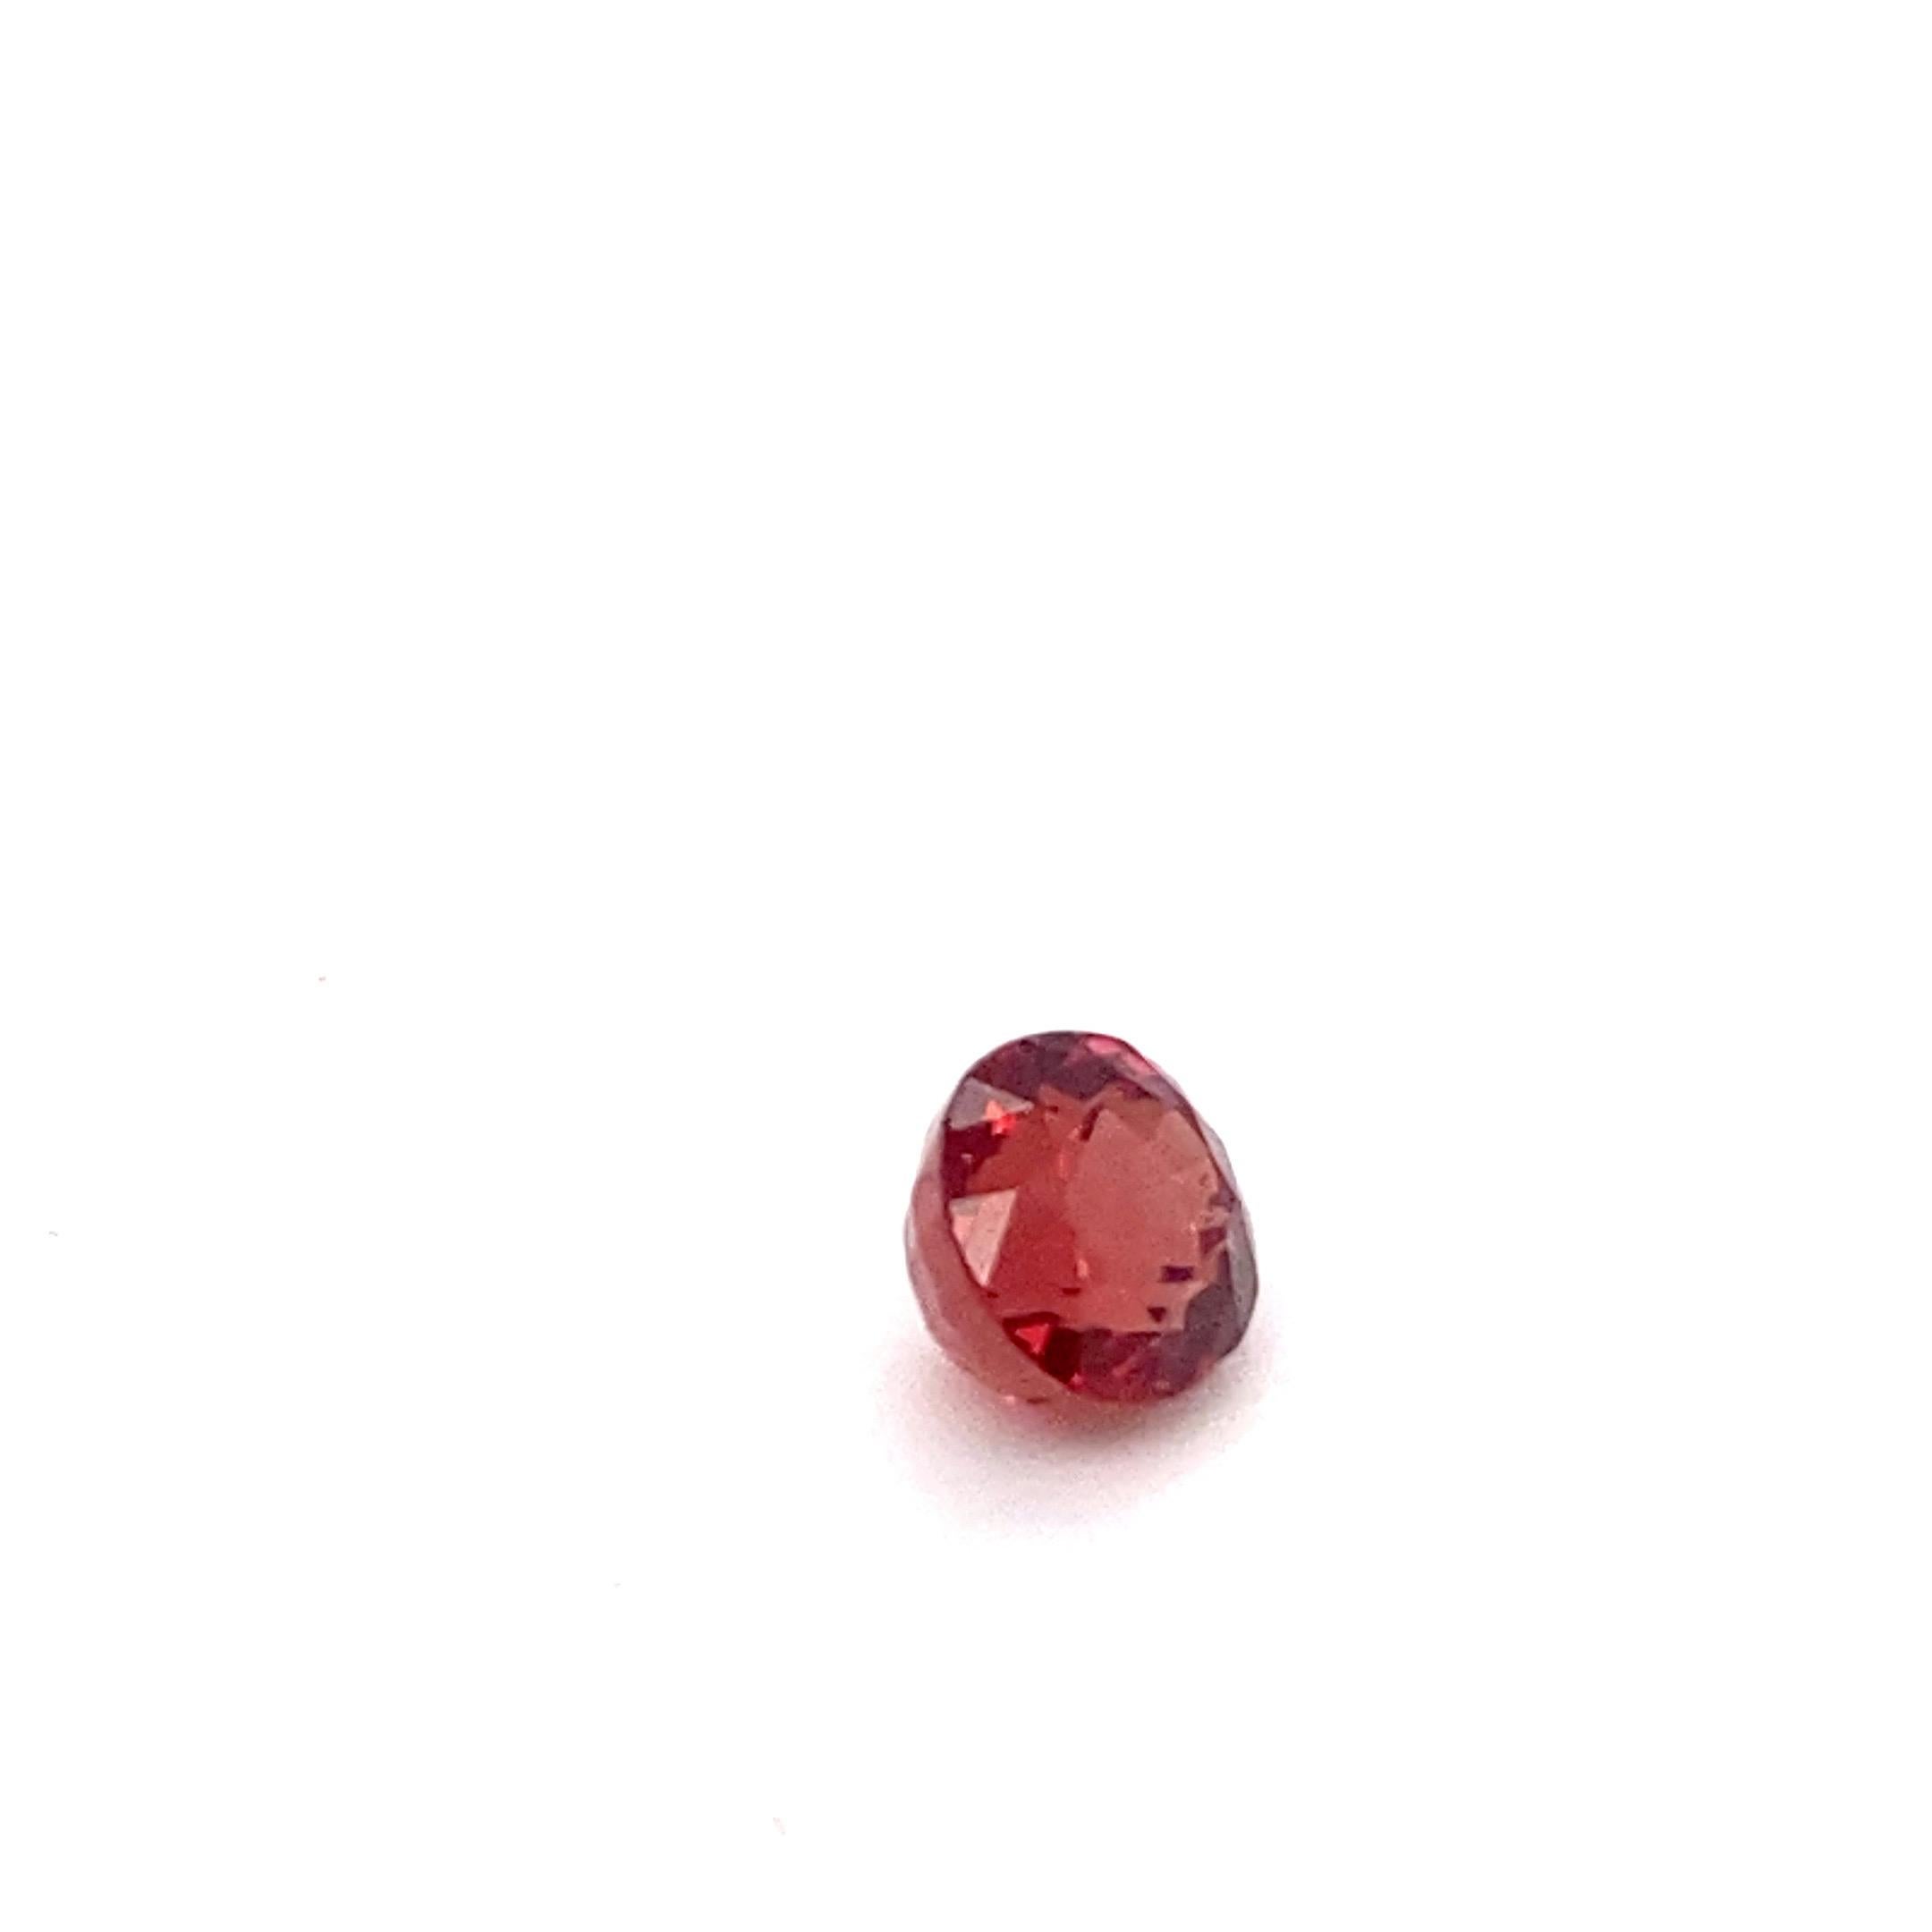 This 2.25 carat oval shape natural red spinel loose gemstone is carefully hand cut and hand polished by skilled artisans. This lustrous loose gemstone can be created into any stunning piece of jewelry according to your choice.
Spinel is the birth